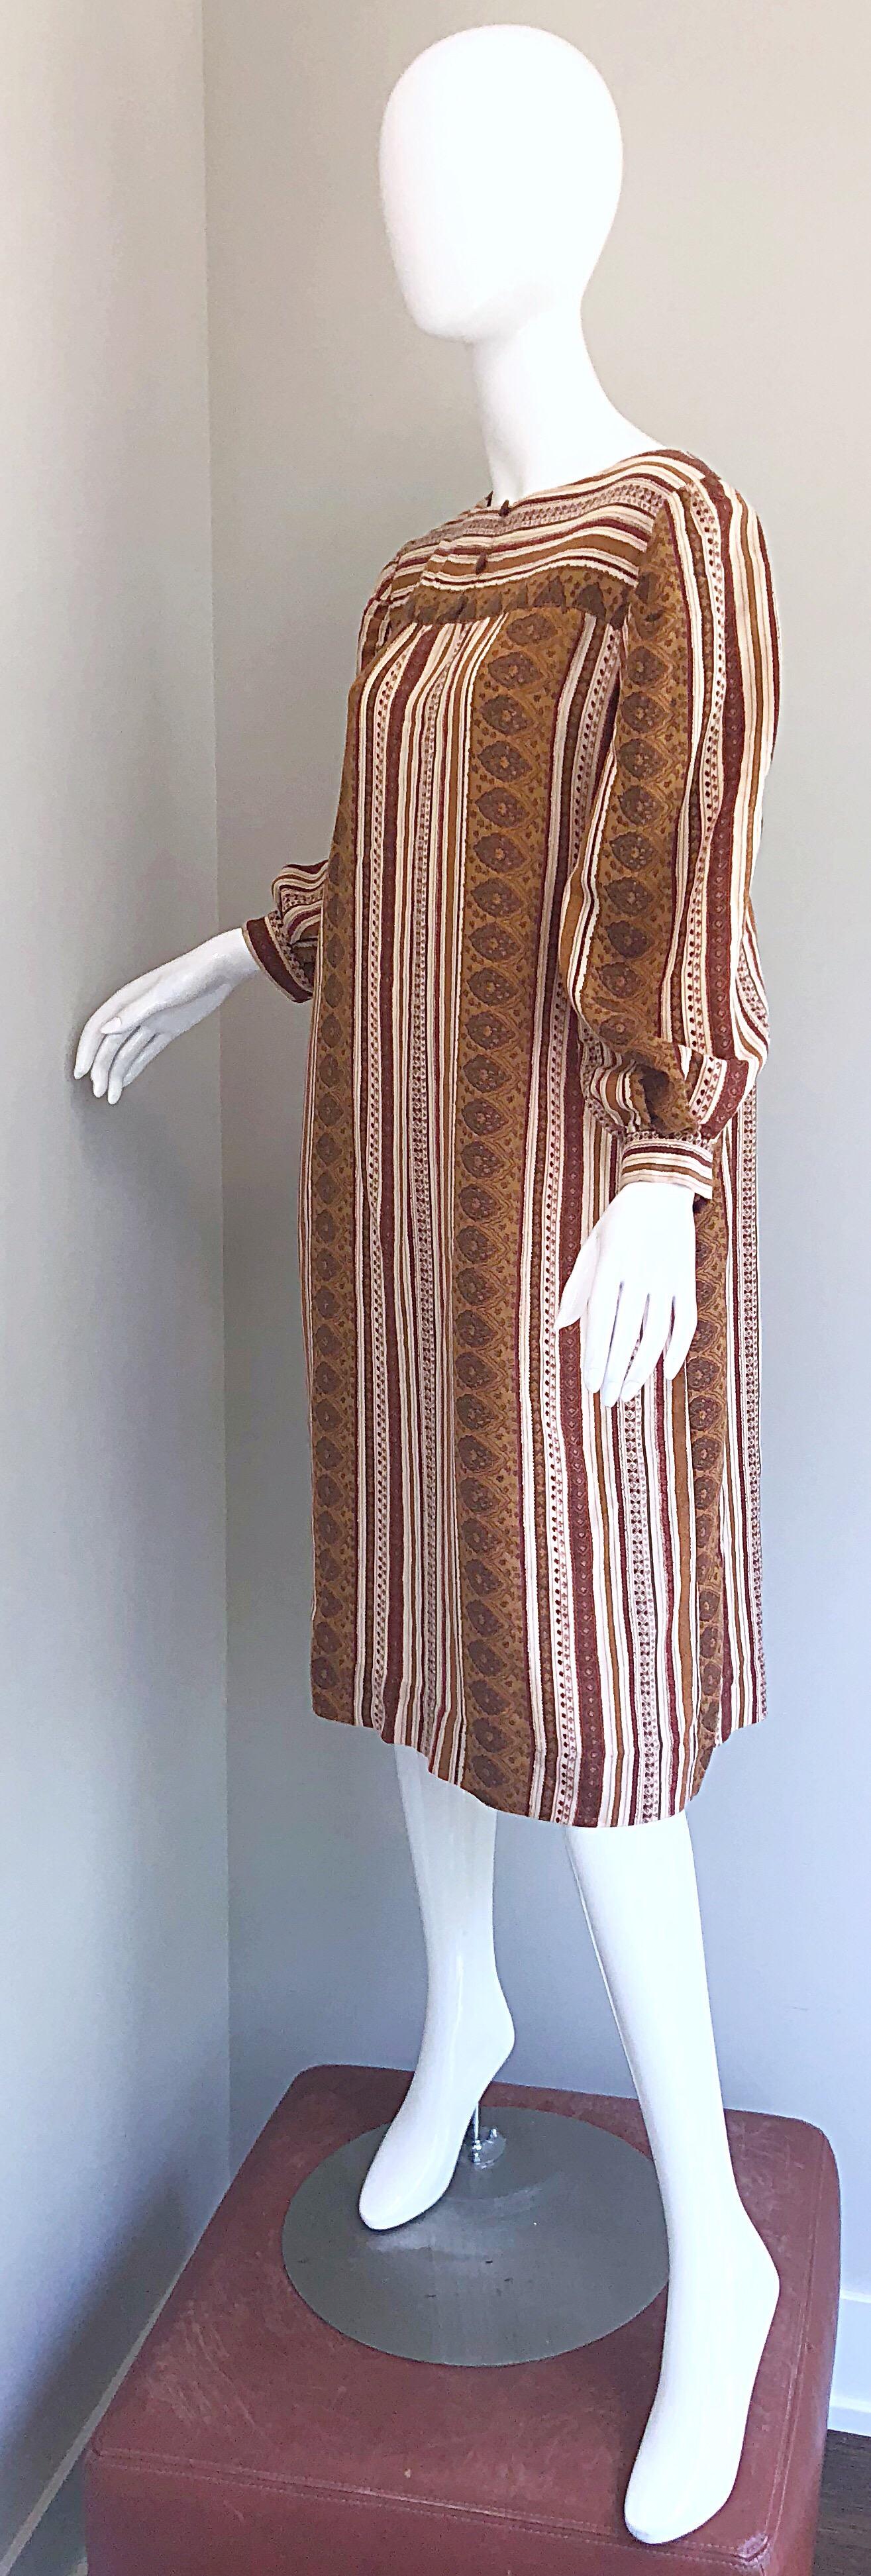 1970s Boho Chic Brown and Ivory Soft Cotton Paisley Print Vintage 70s Dress 4